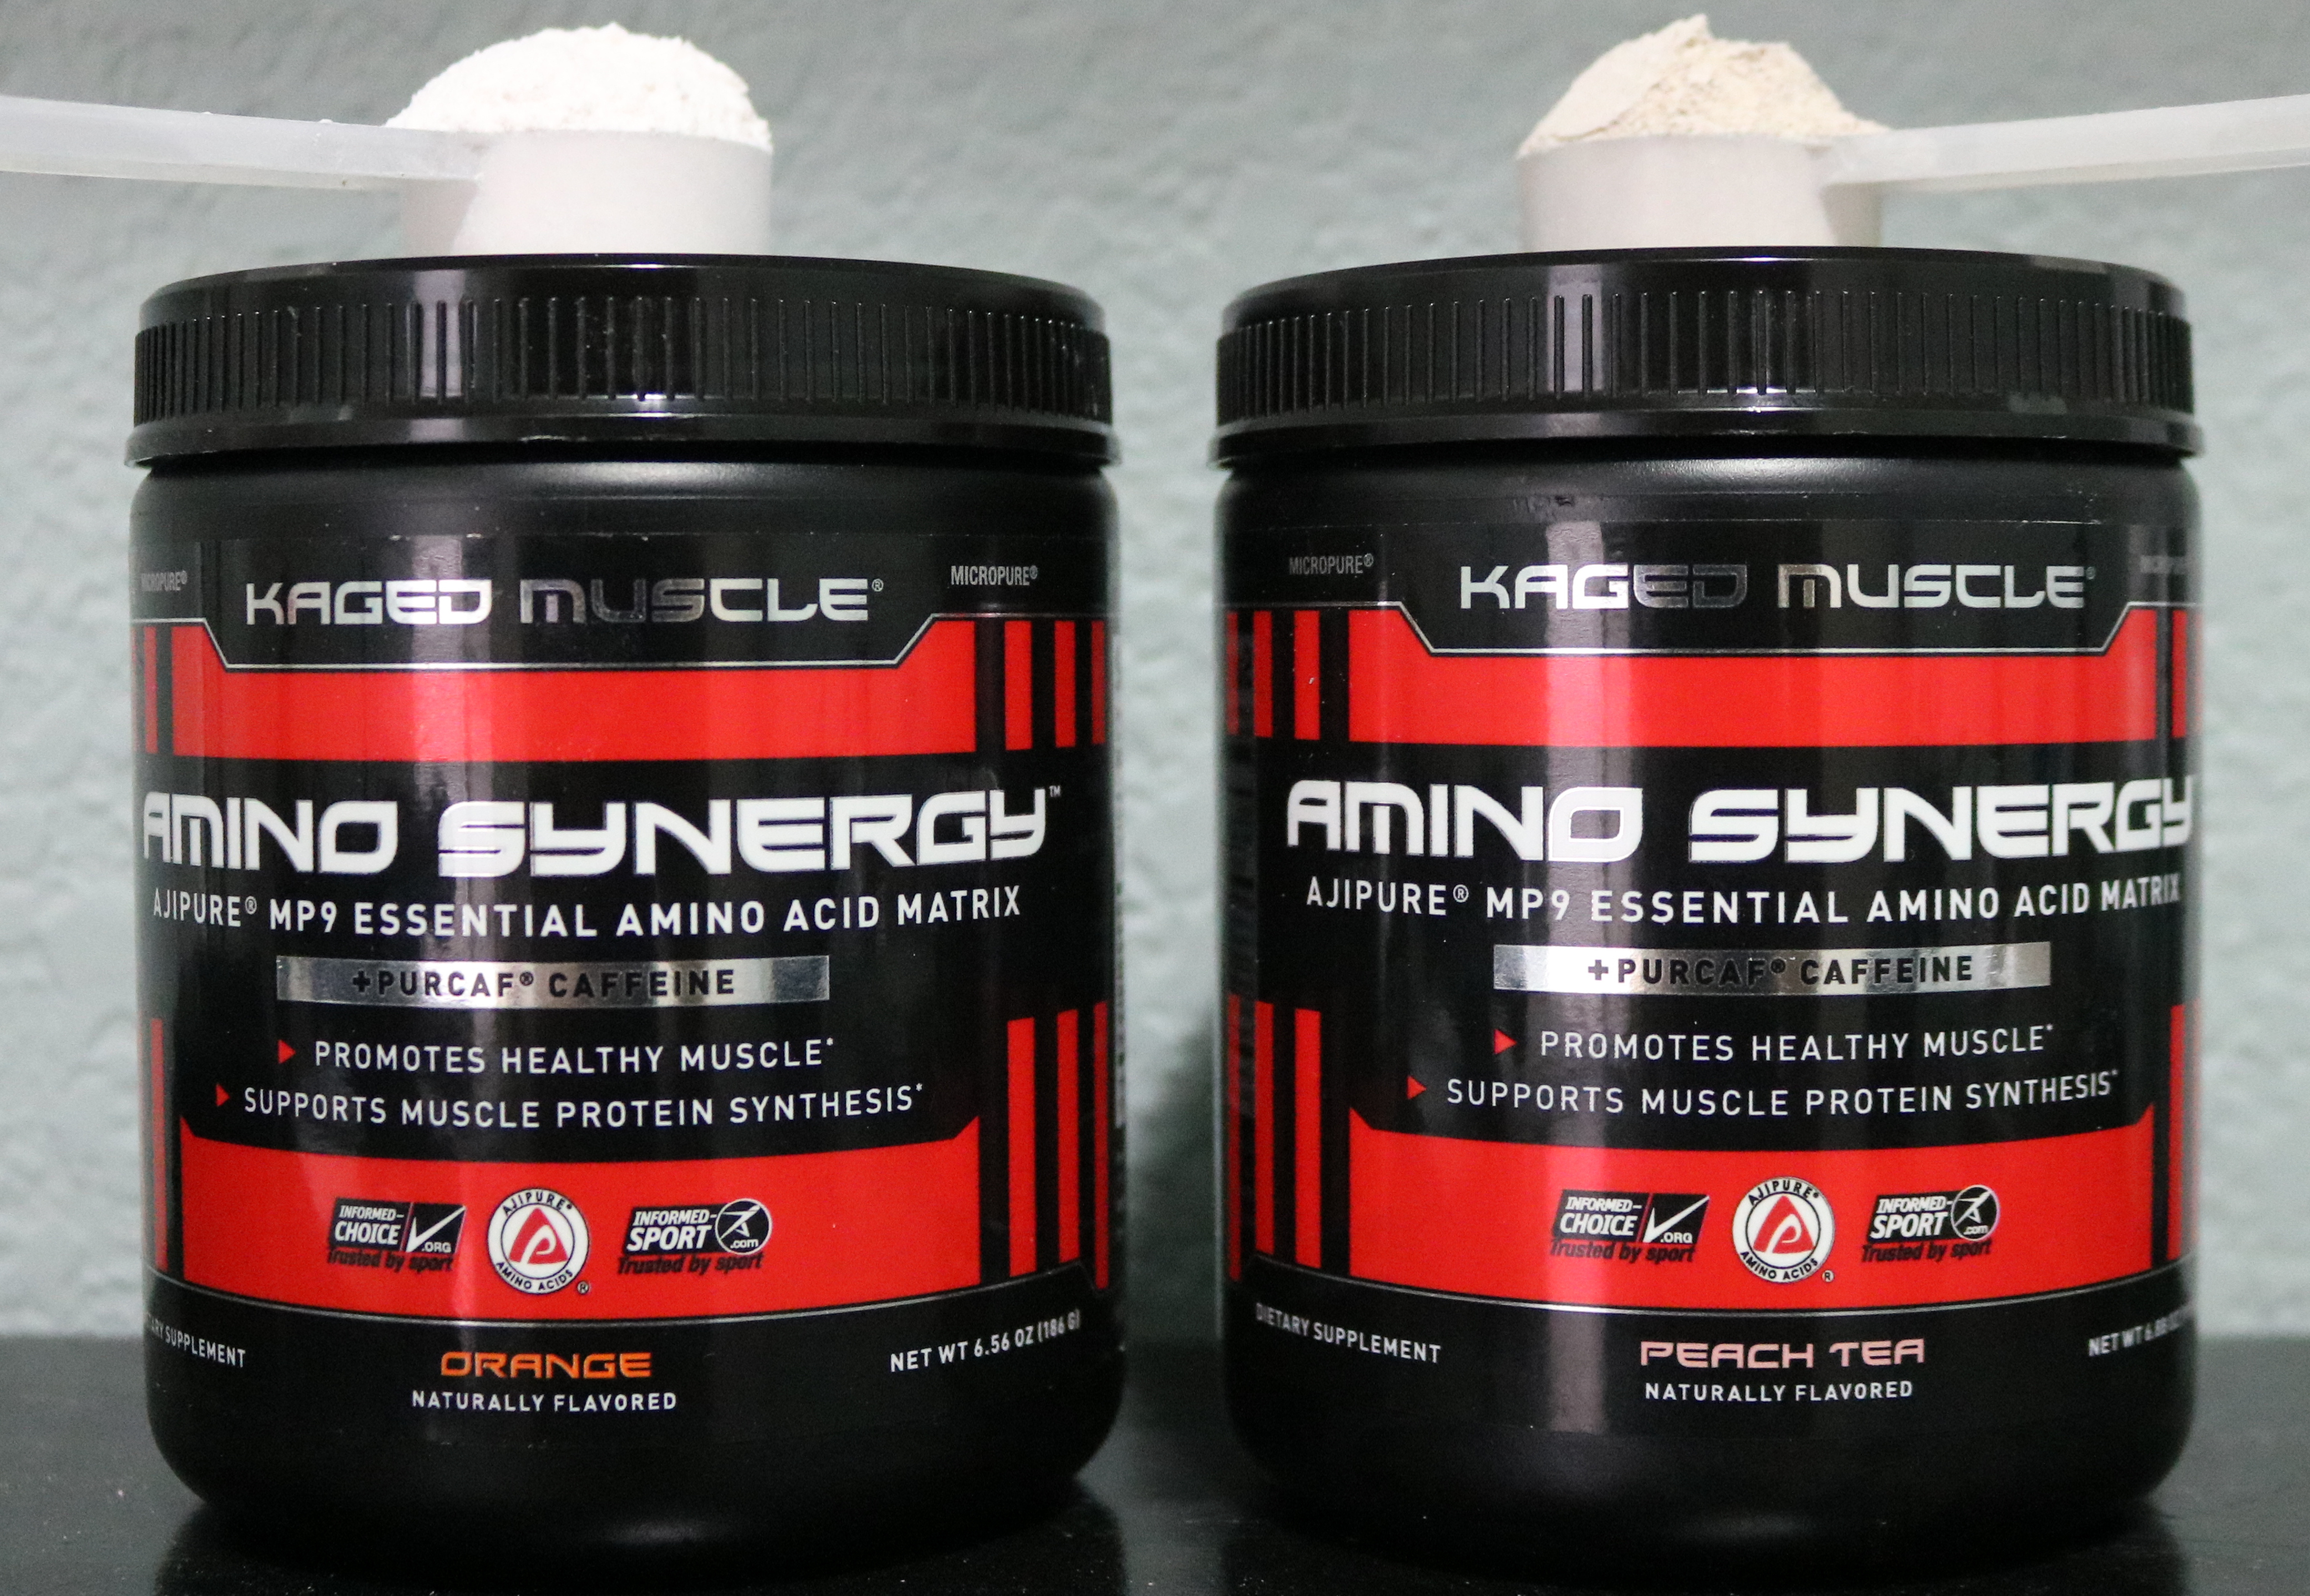 Kaged Muscle Amino Synergy Introduces Peach Tea & Orange: Knockout Flavors!